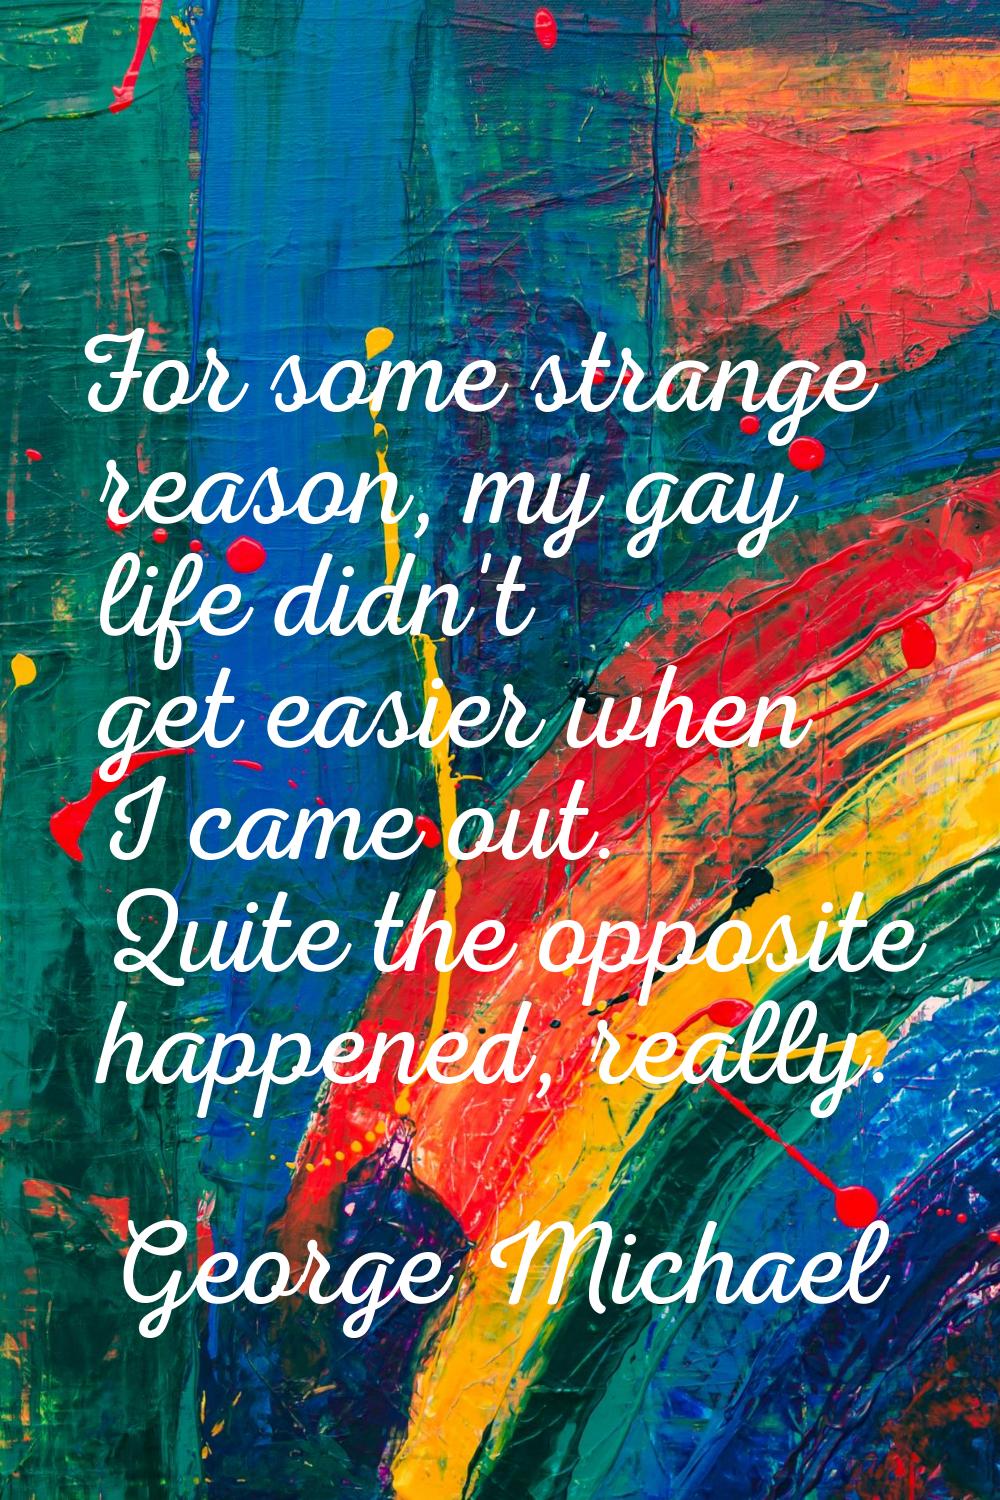 For some strange reason, my gay life didn't get easier when I came out. Quite the opposite happened